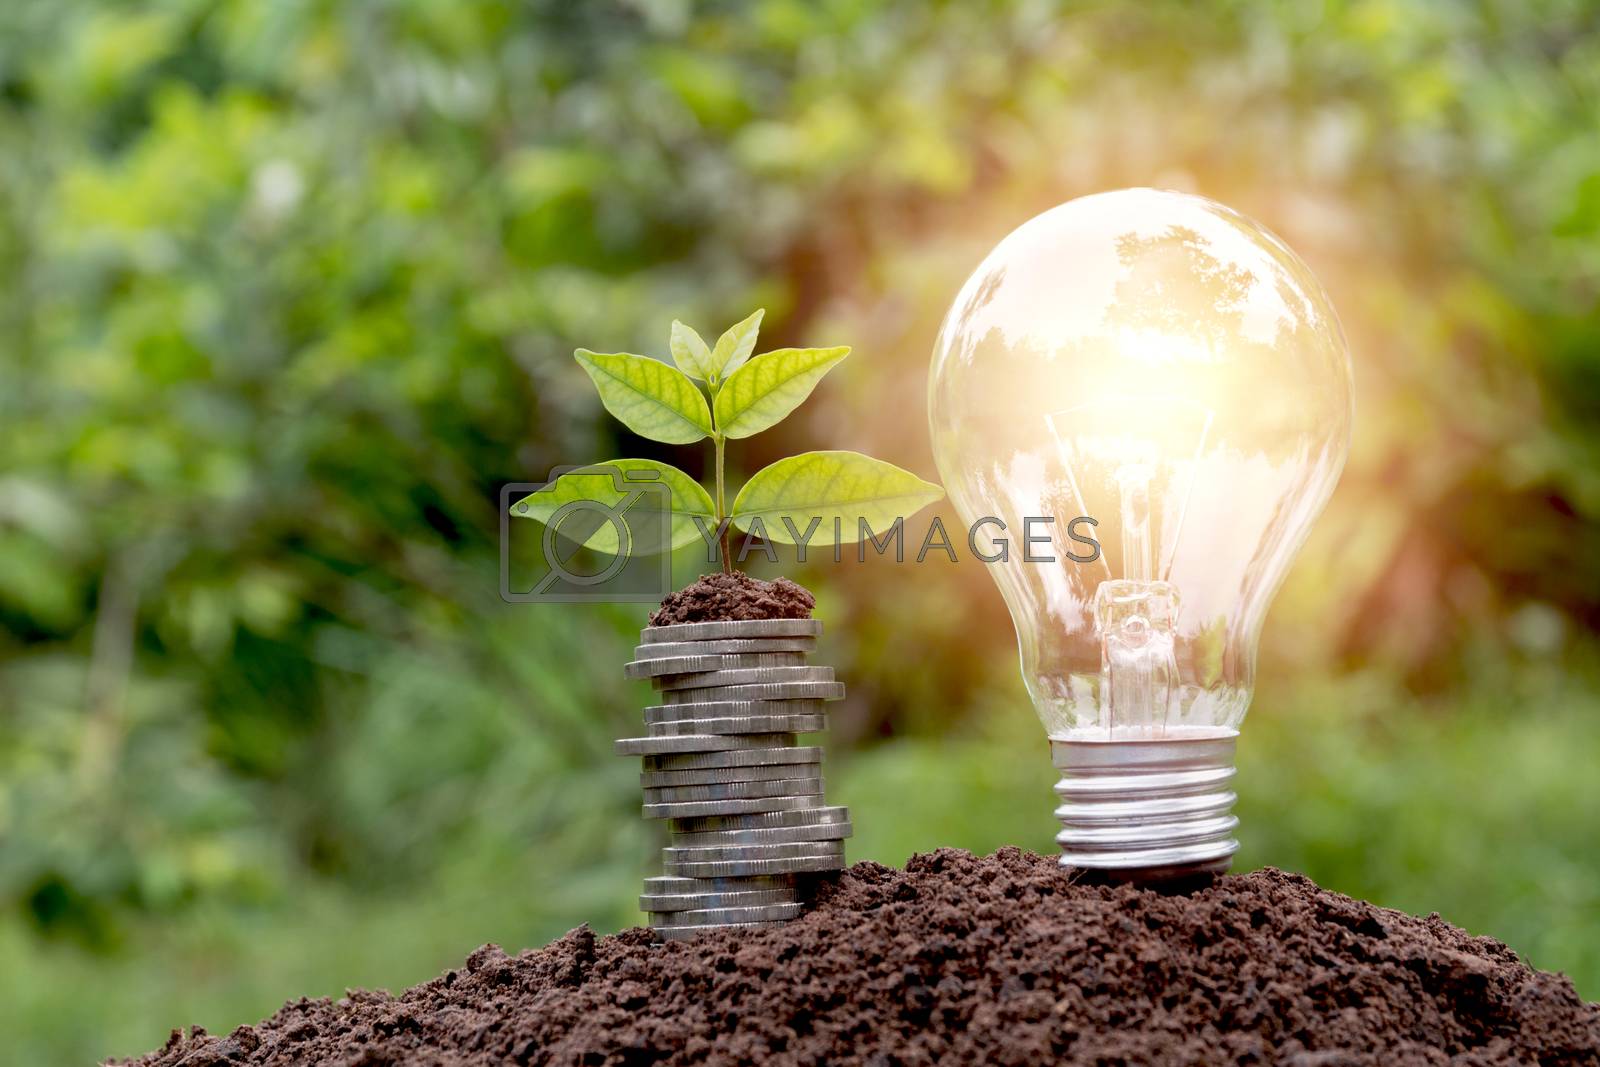 Royalty free image of Energy saving light bulb and tree growing on stacks of coins on  by kirisa99